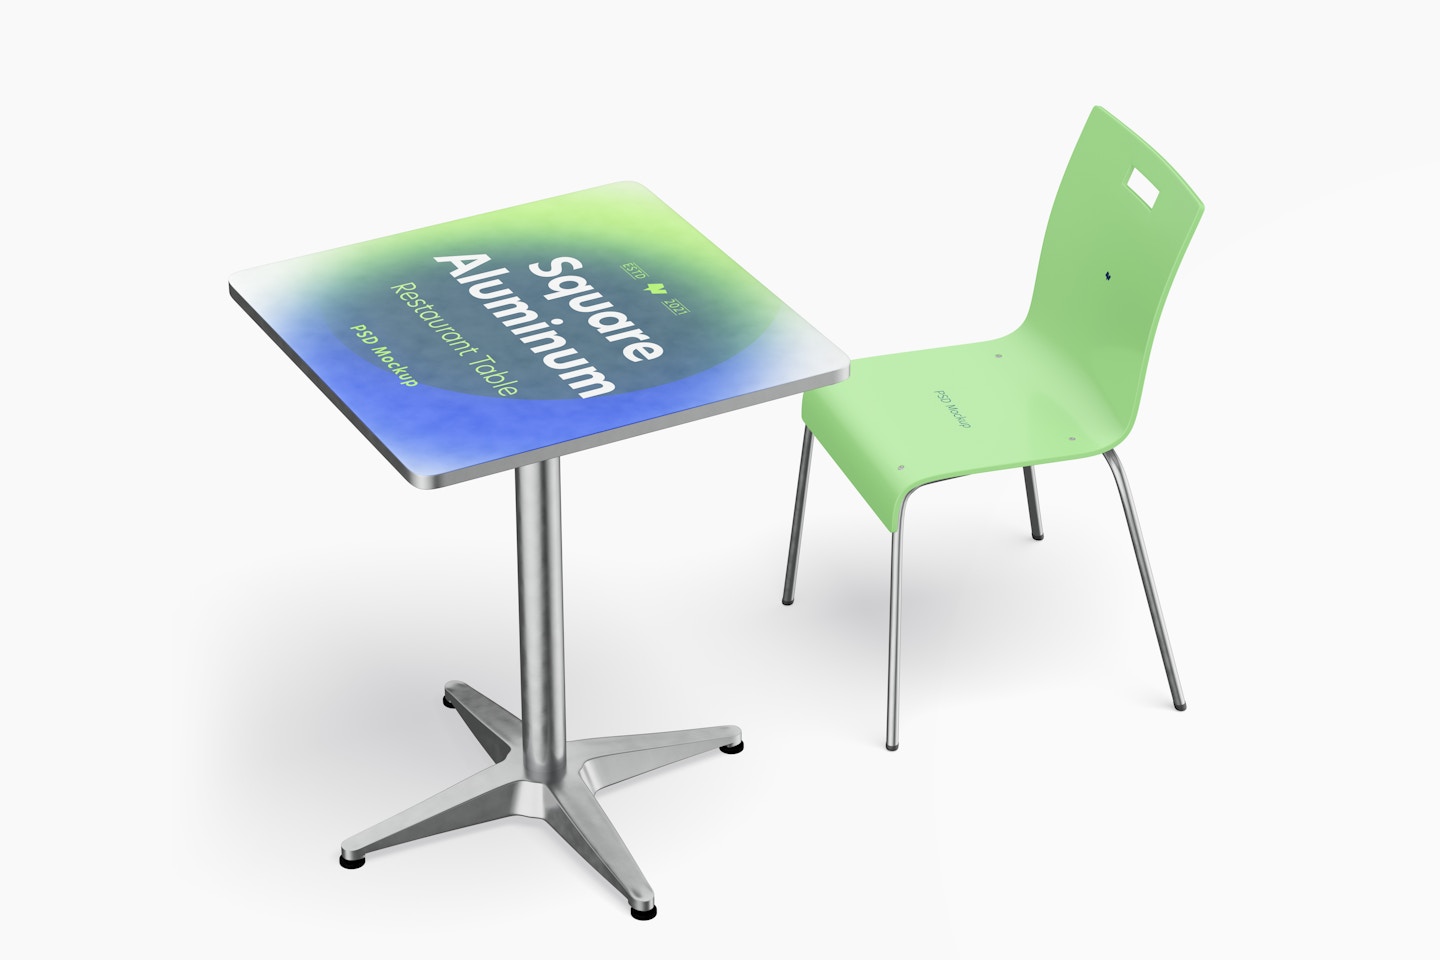 Square Aluminum Restaurant Table with Chair Mockup